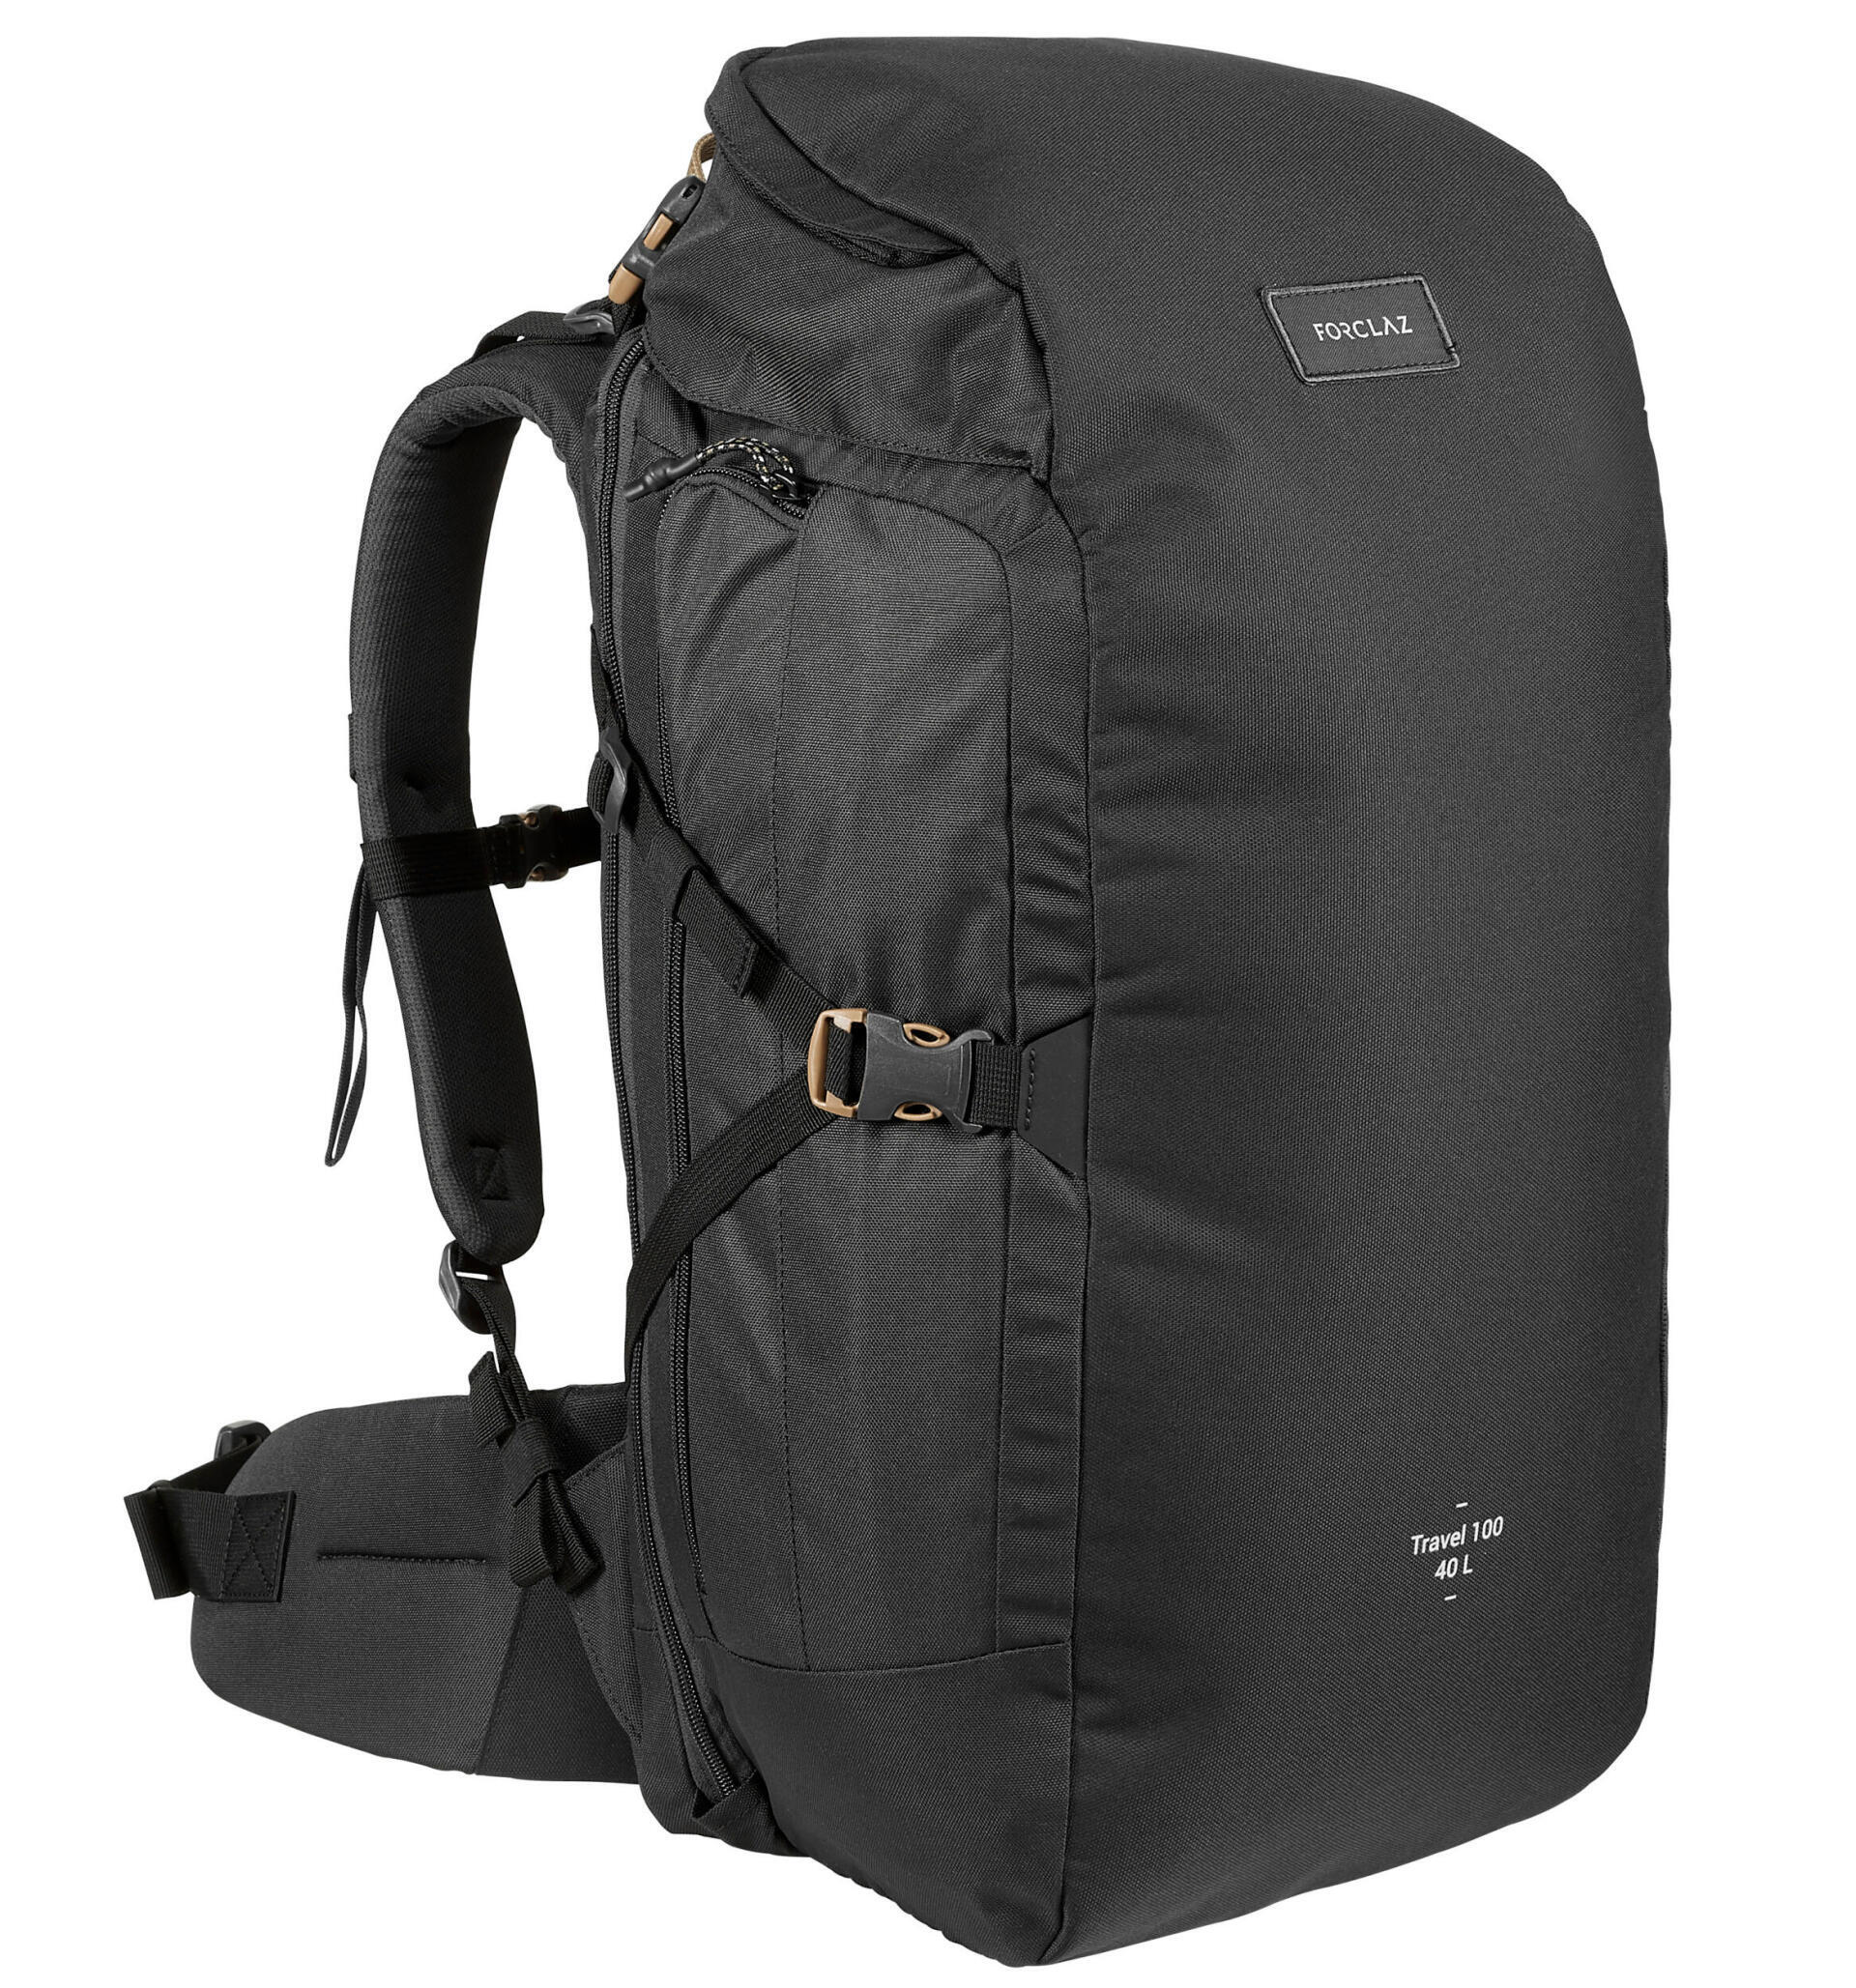 Trekking and Travel Backpack 60 L - Travel 100